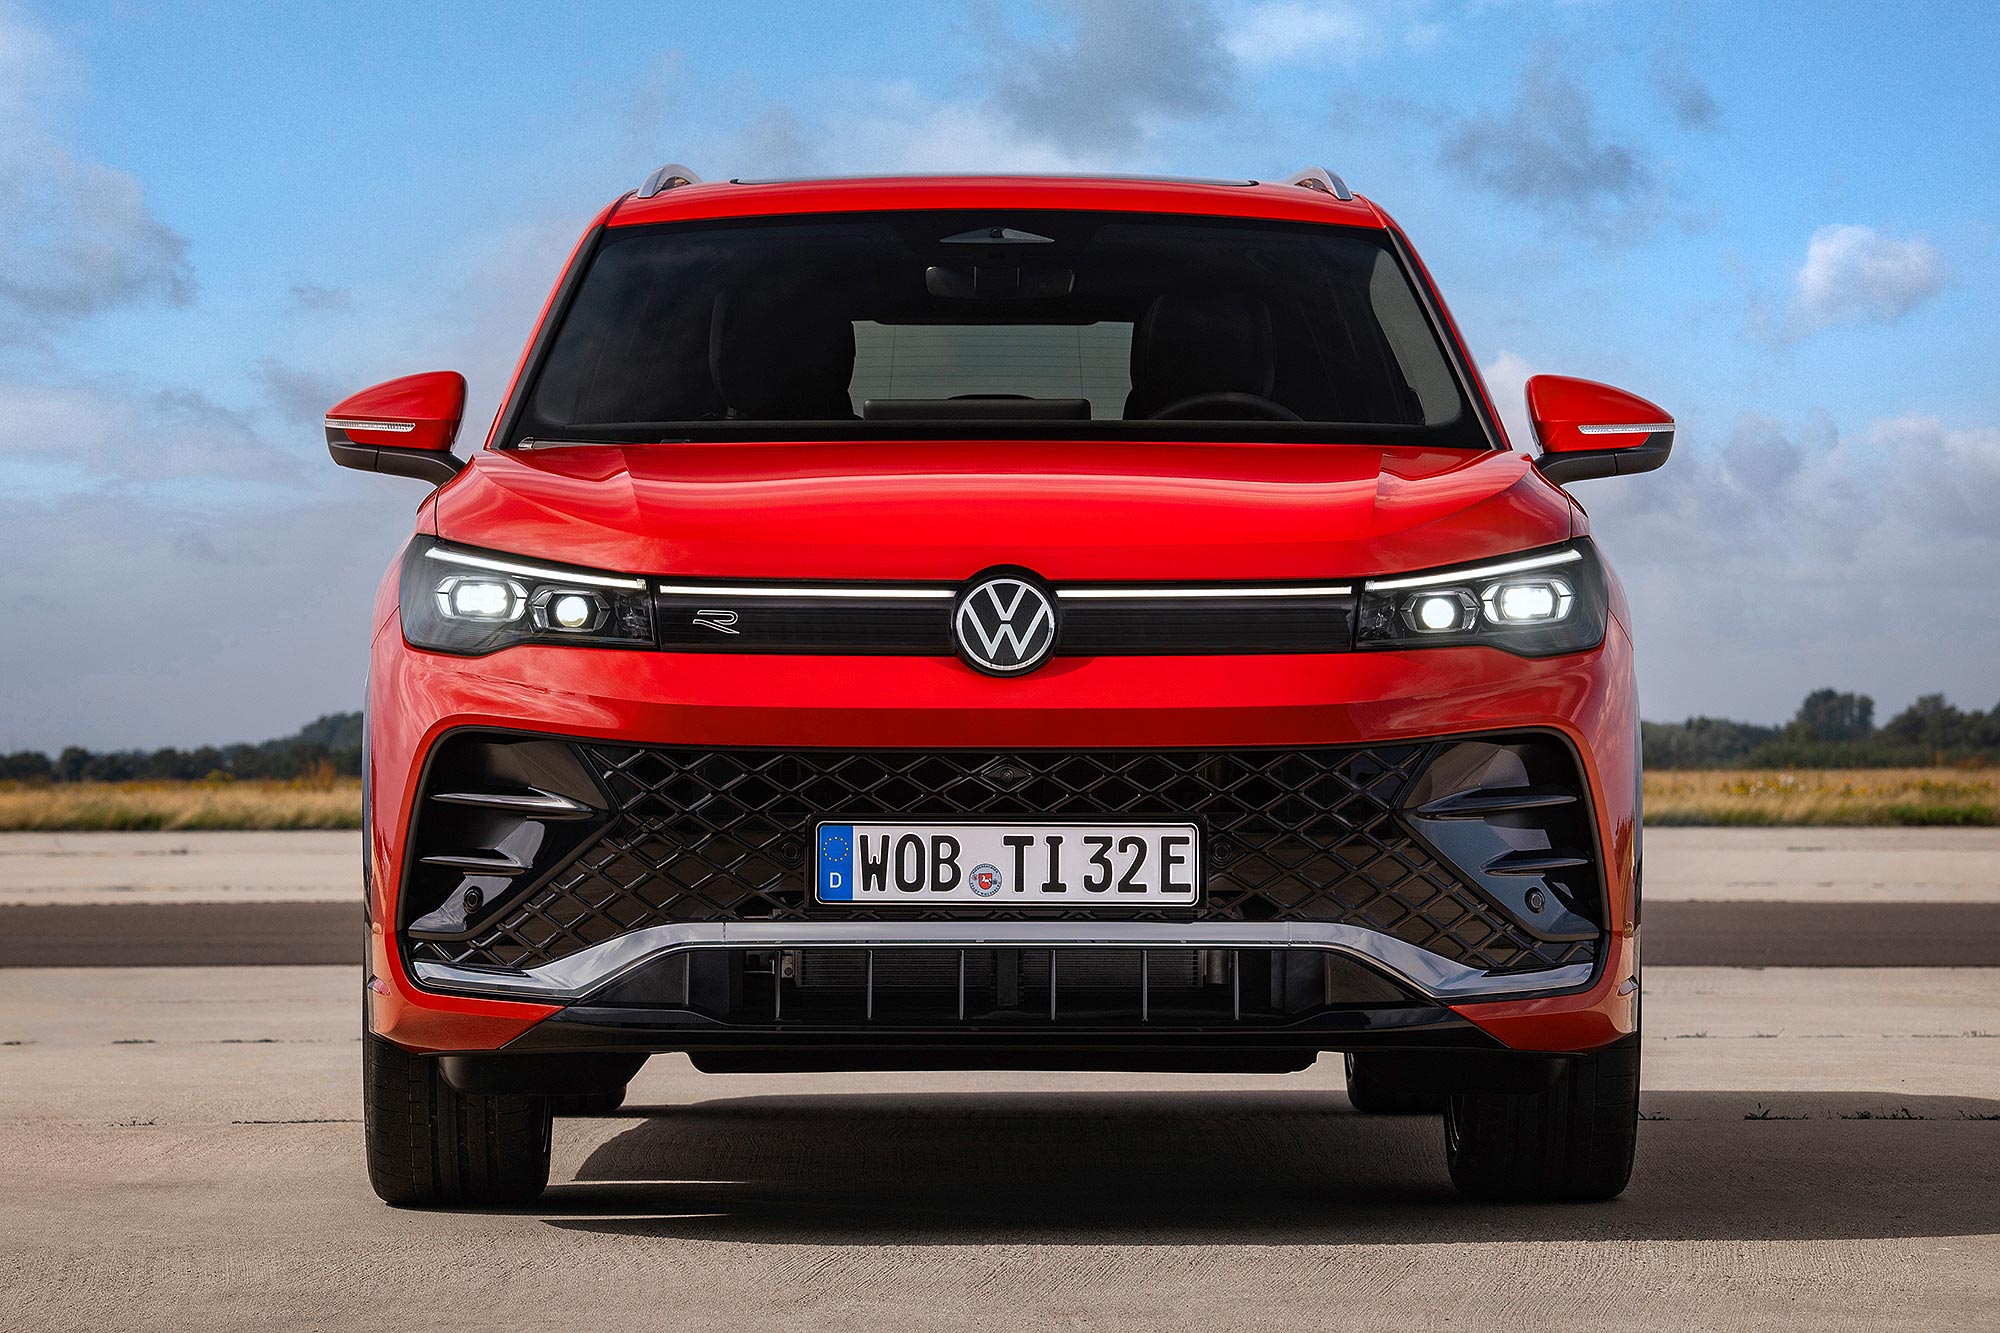 2022 Volkswagen Tiguan AllSpace unveiled with bolder styling